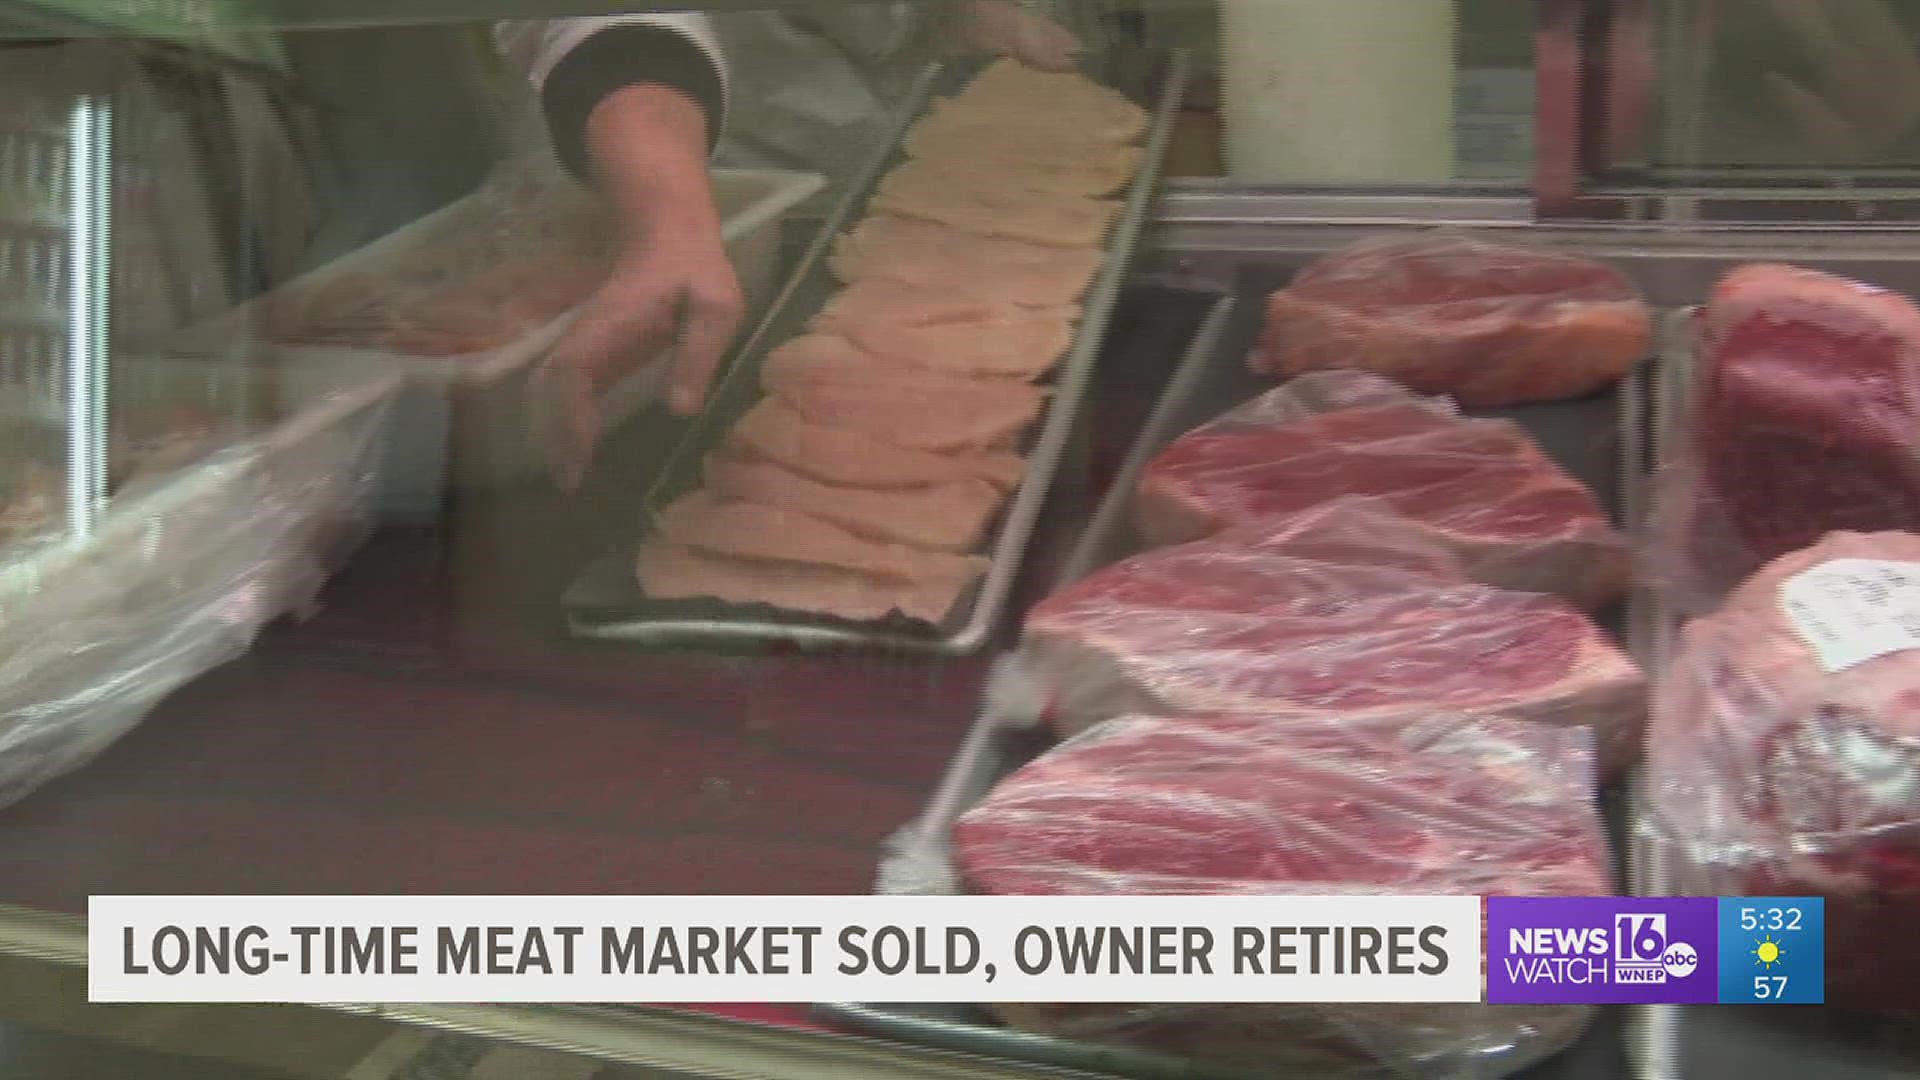 Gary Oney has owned Gary's Meat Market near Stroudsburg for more than 50 years.  He's now moving onto retirement and new owners are moving in.